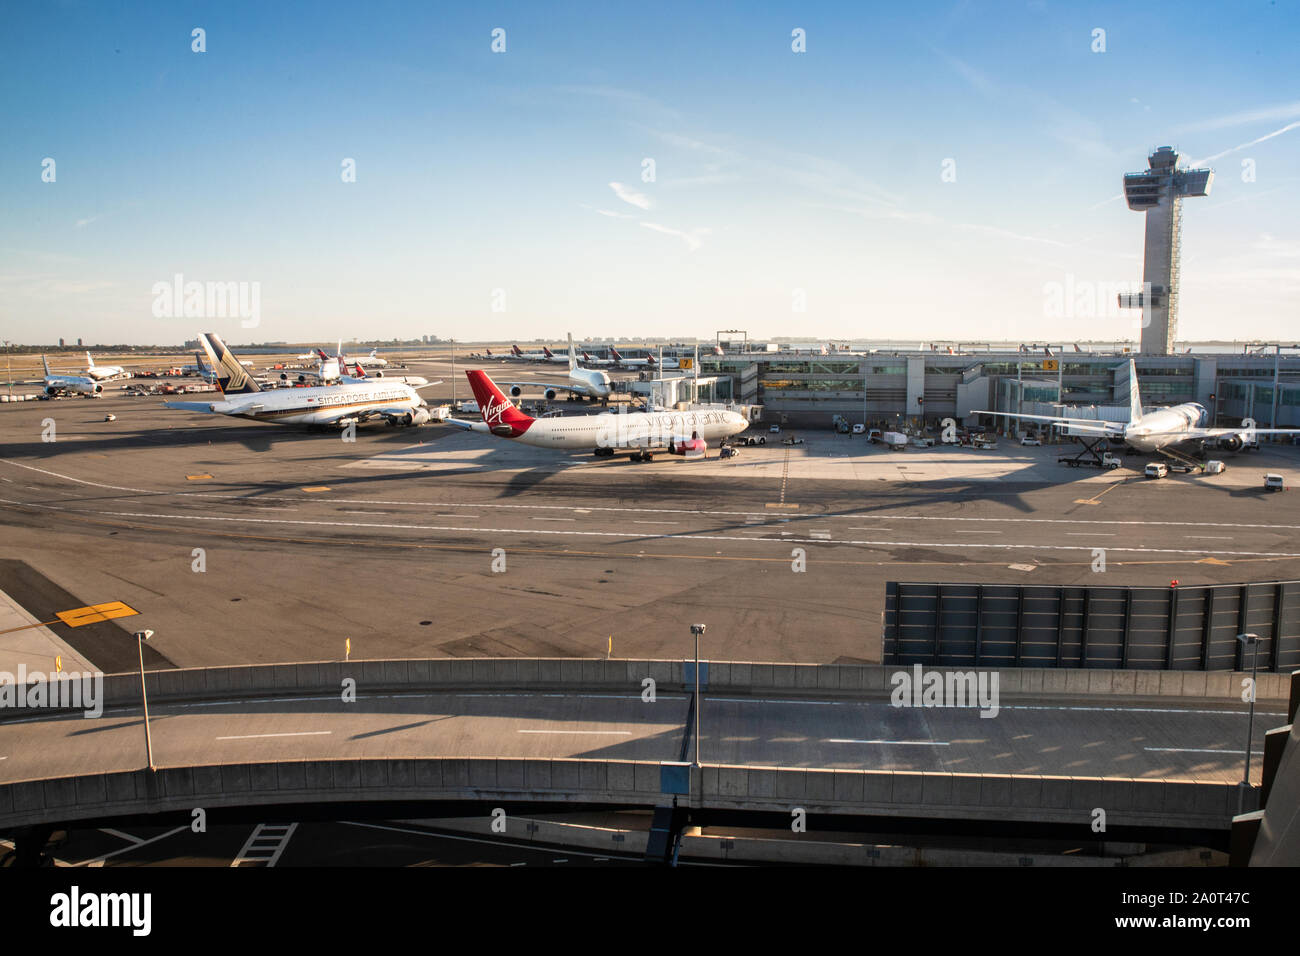 New York City September 20 2019 View Of The Runway To John F Kennedy International Airport In New York With Commercial Jets In View 2A0T47C 